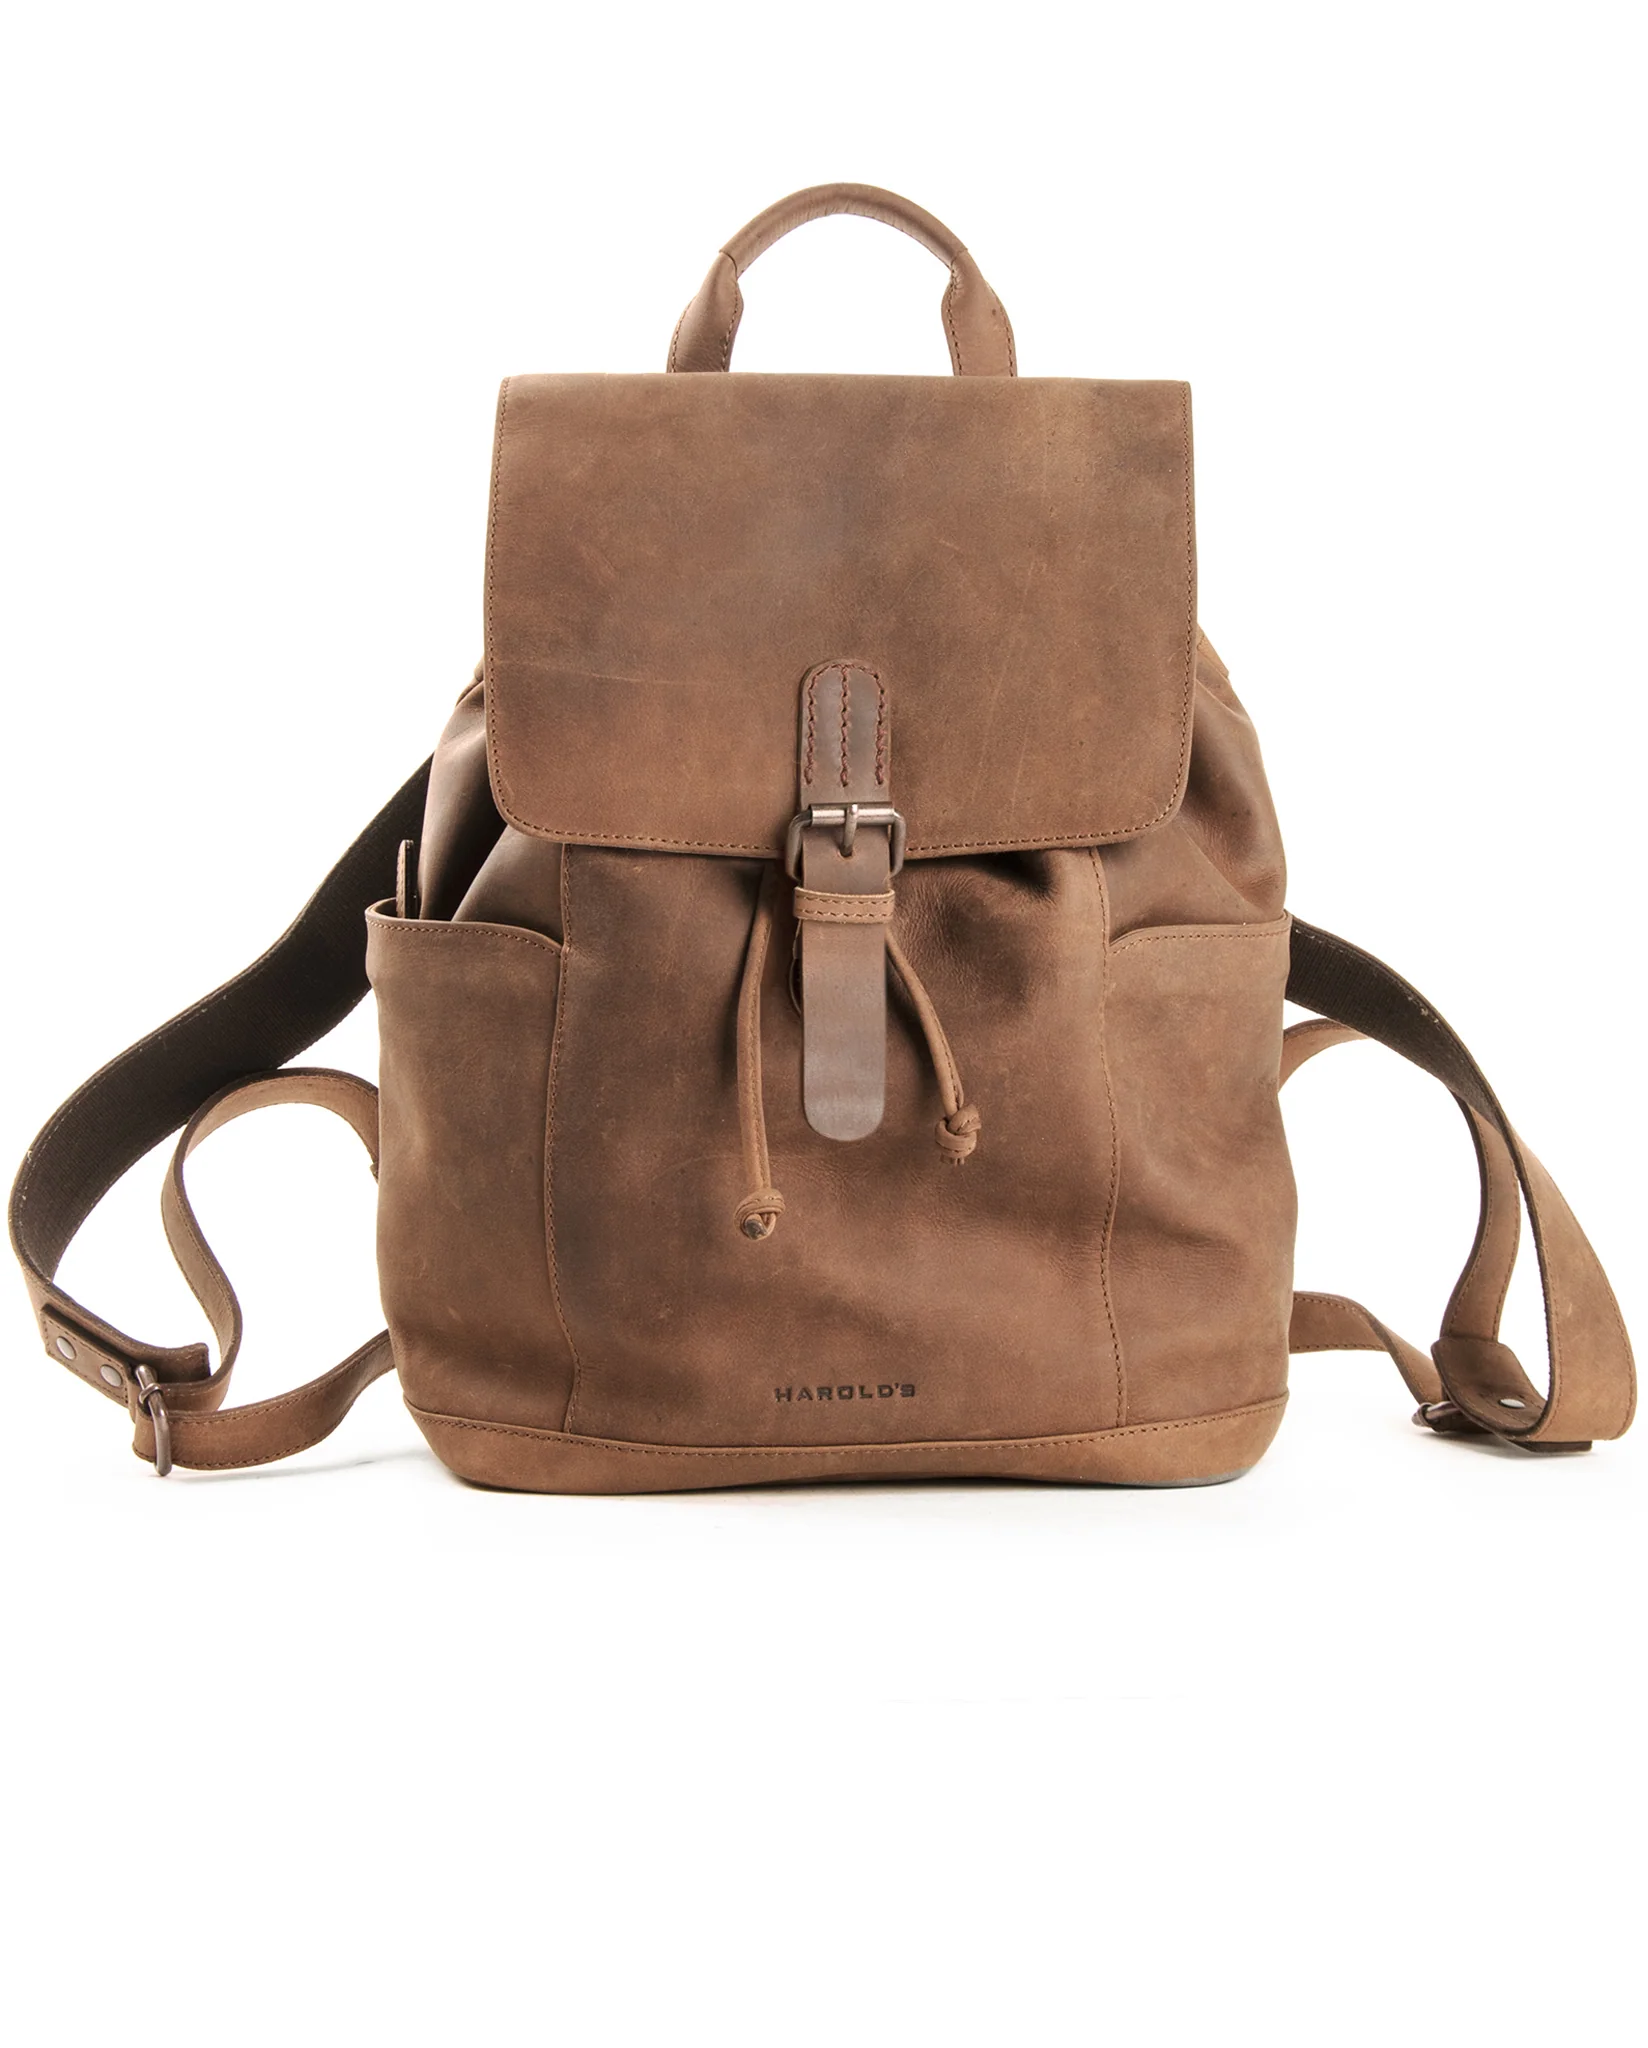 Antic heritage Backpack L